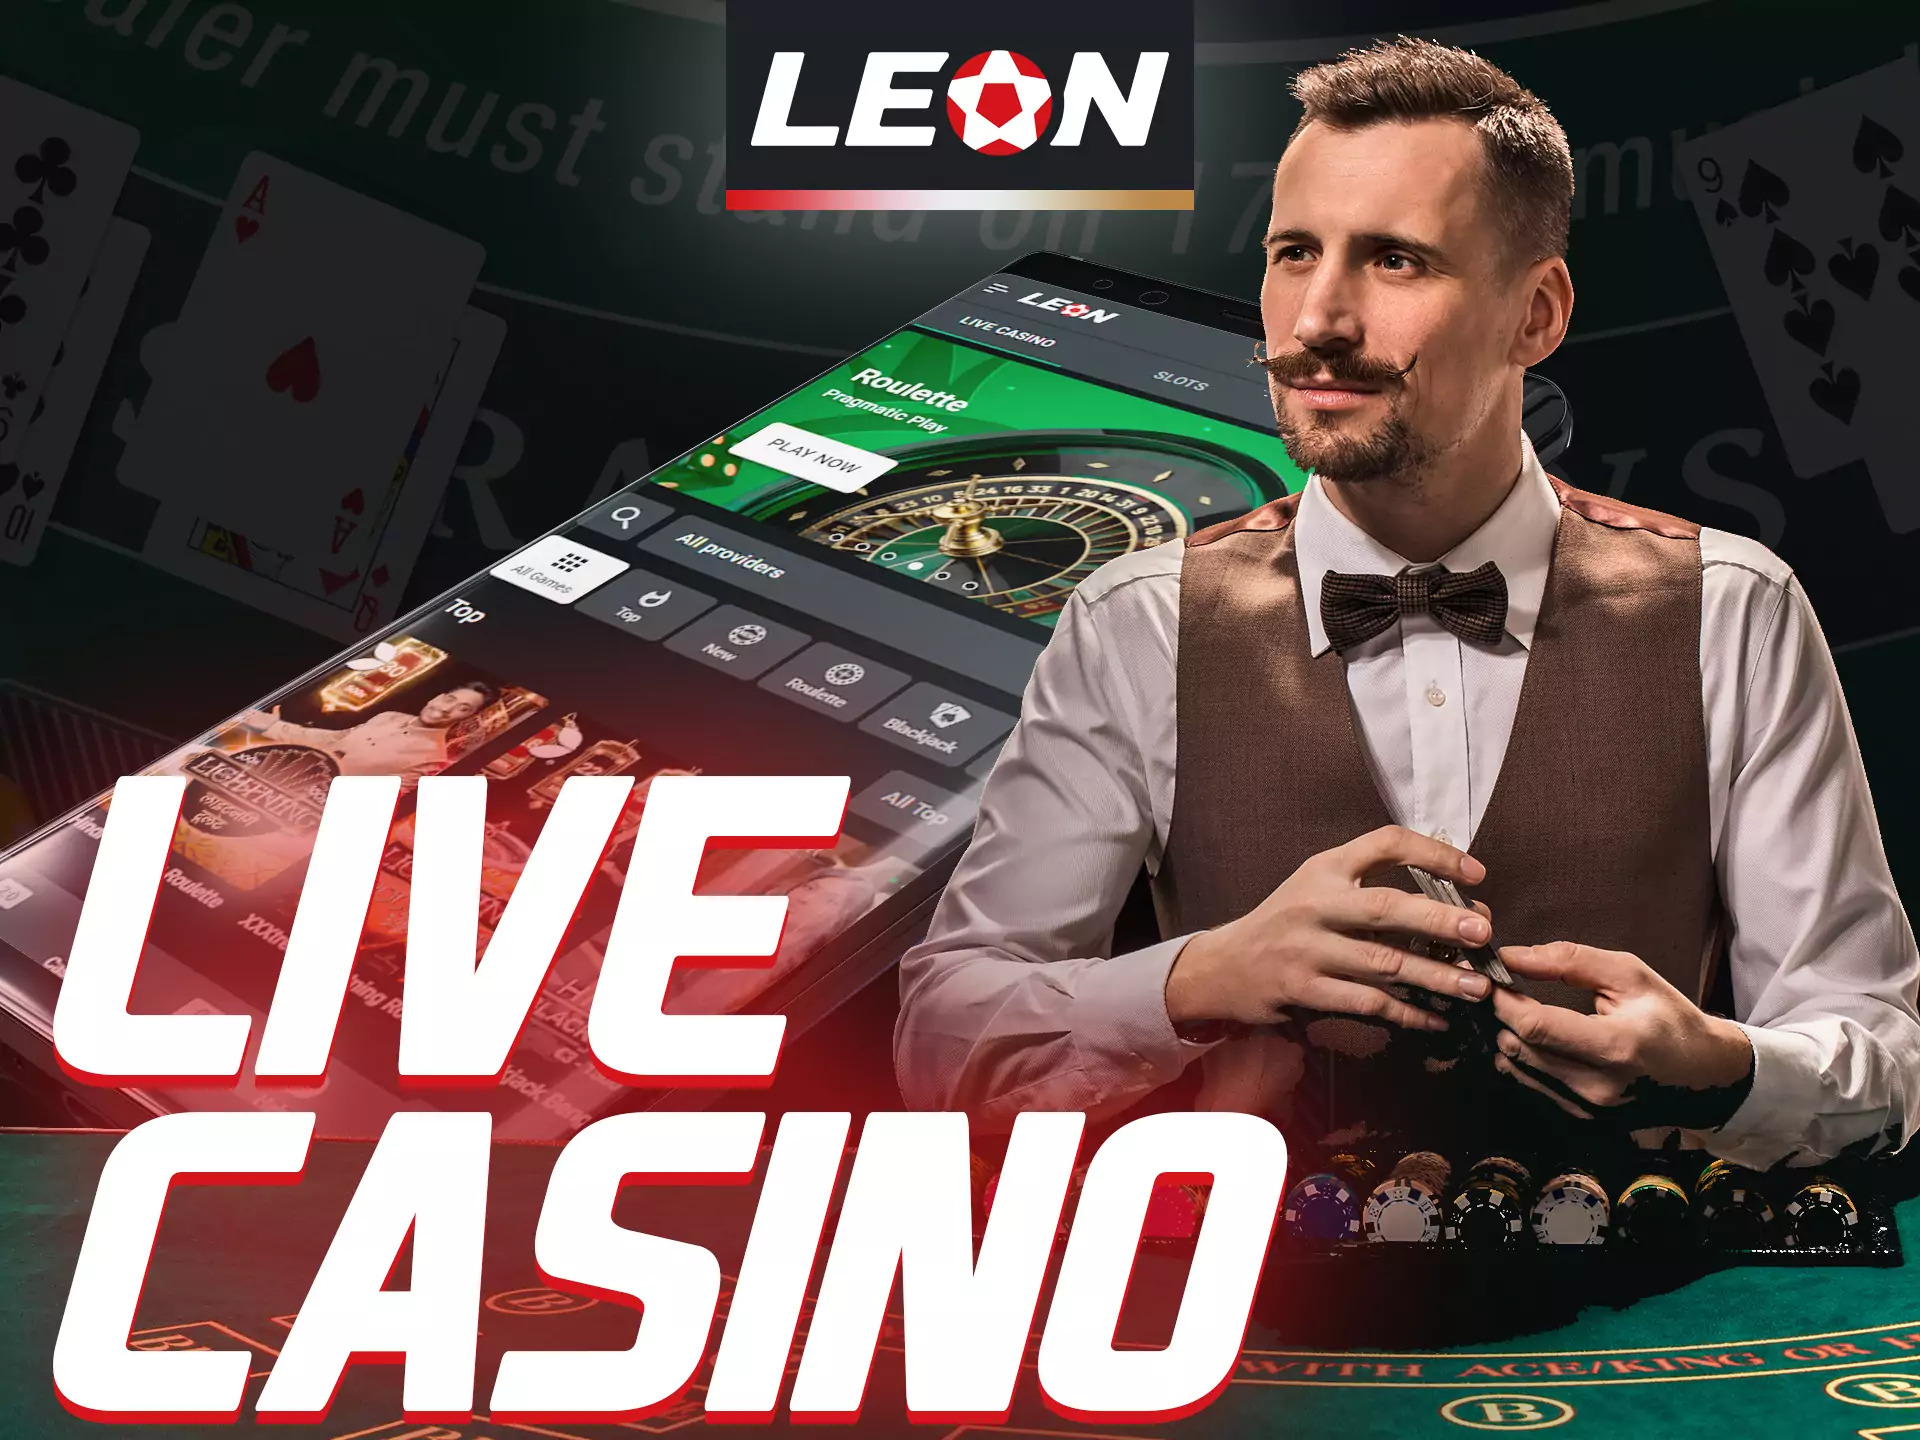 In the live casino in the Leonbet app you can play with real dealers.